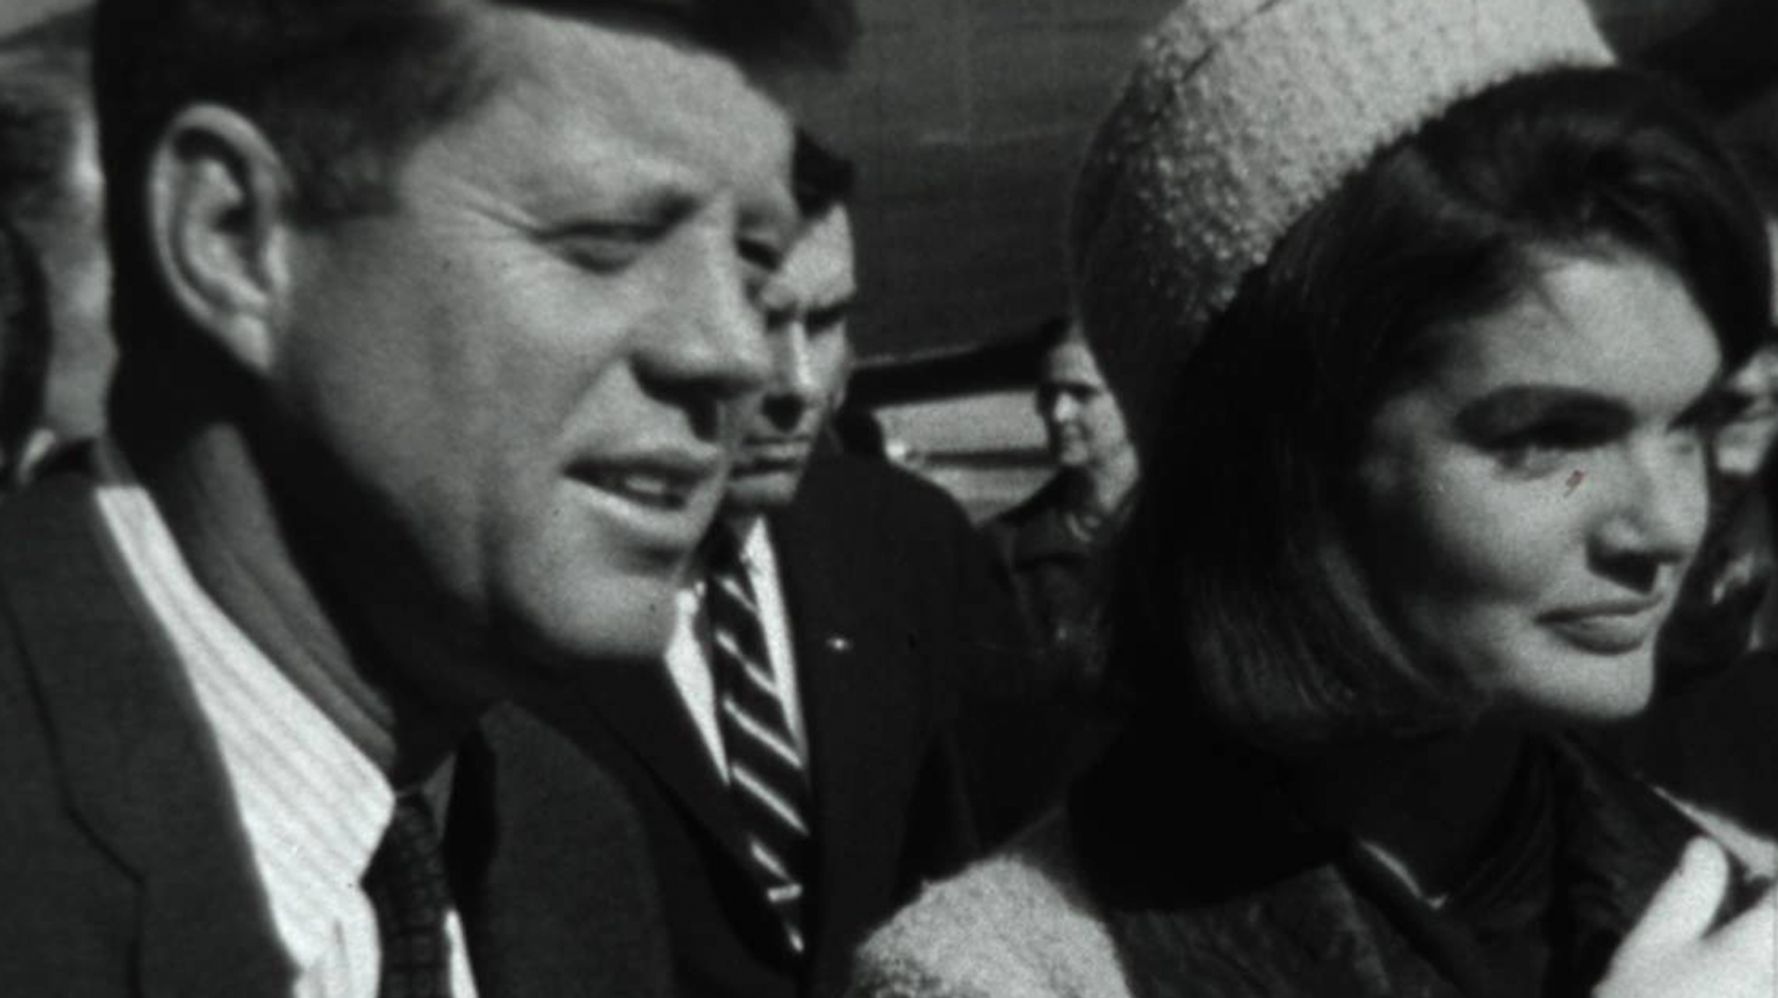 The Release Of The Jfk Assassination Files Is Raising Some Serious